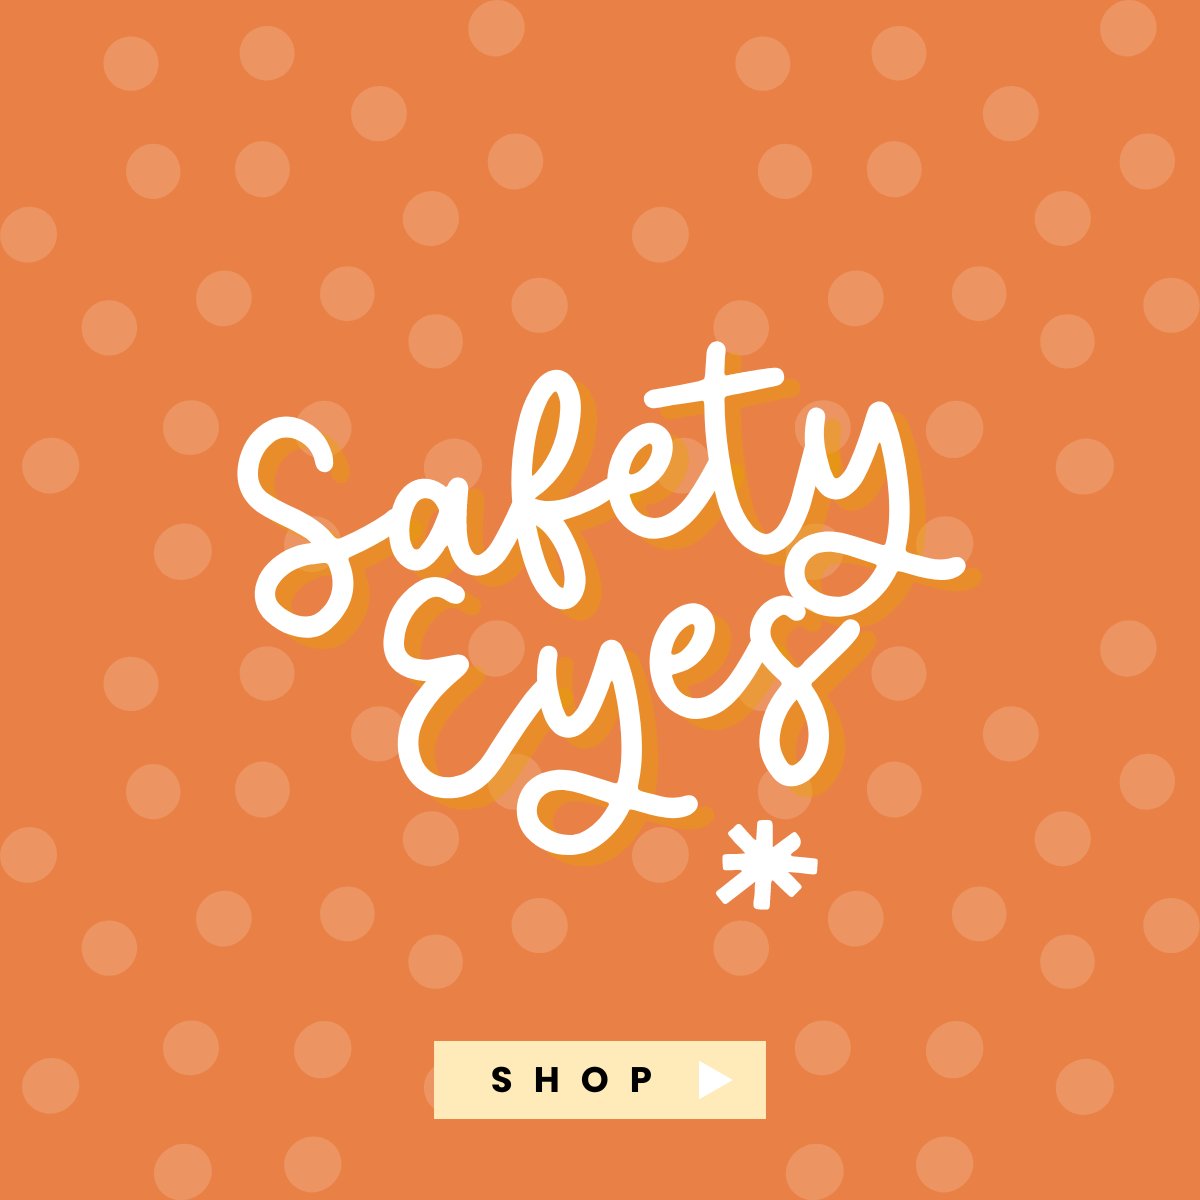 Kawaii Popsicle Safety Eye Mate - Safety Eye Tool – 3amgracedesigns